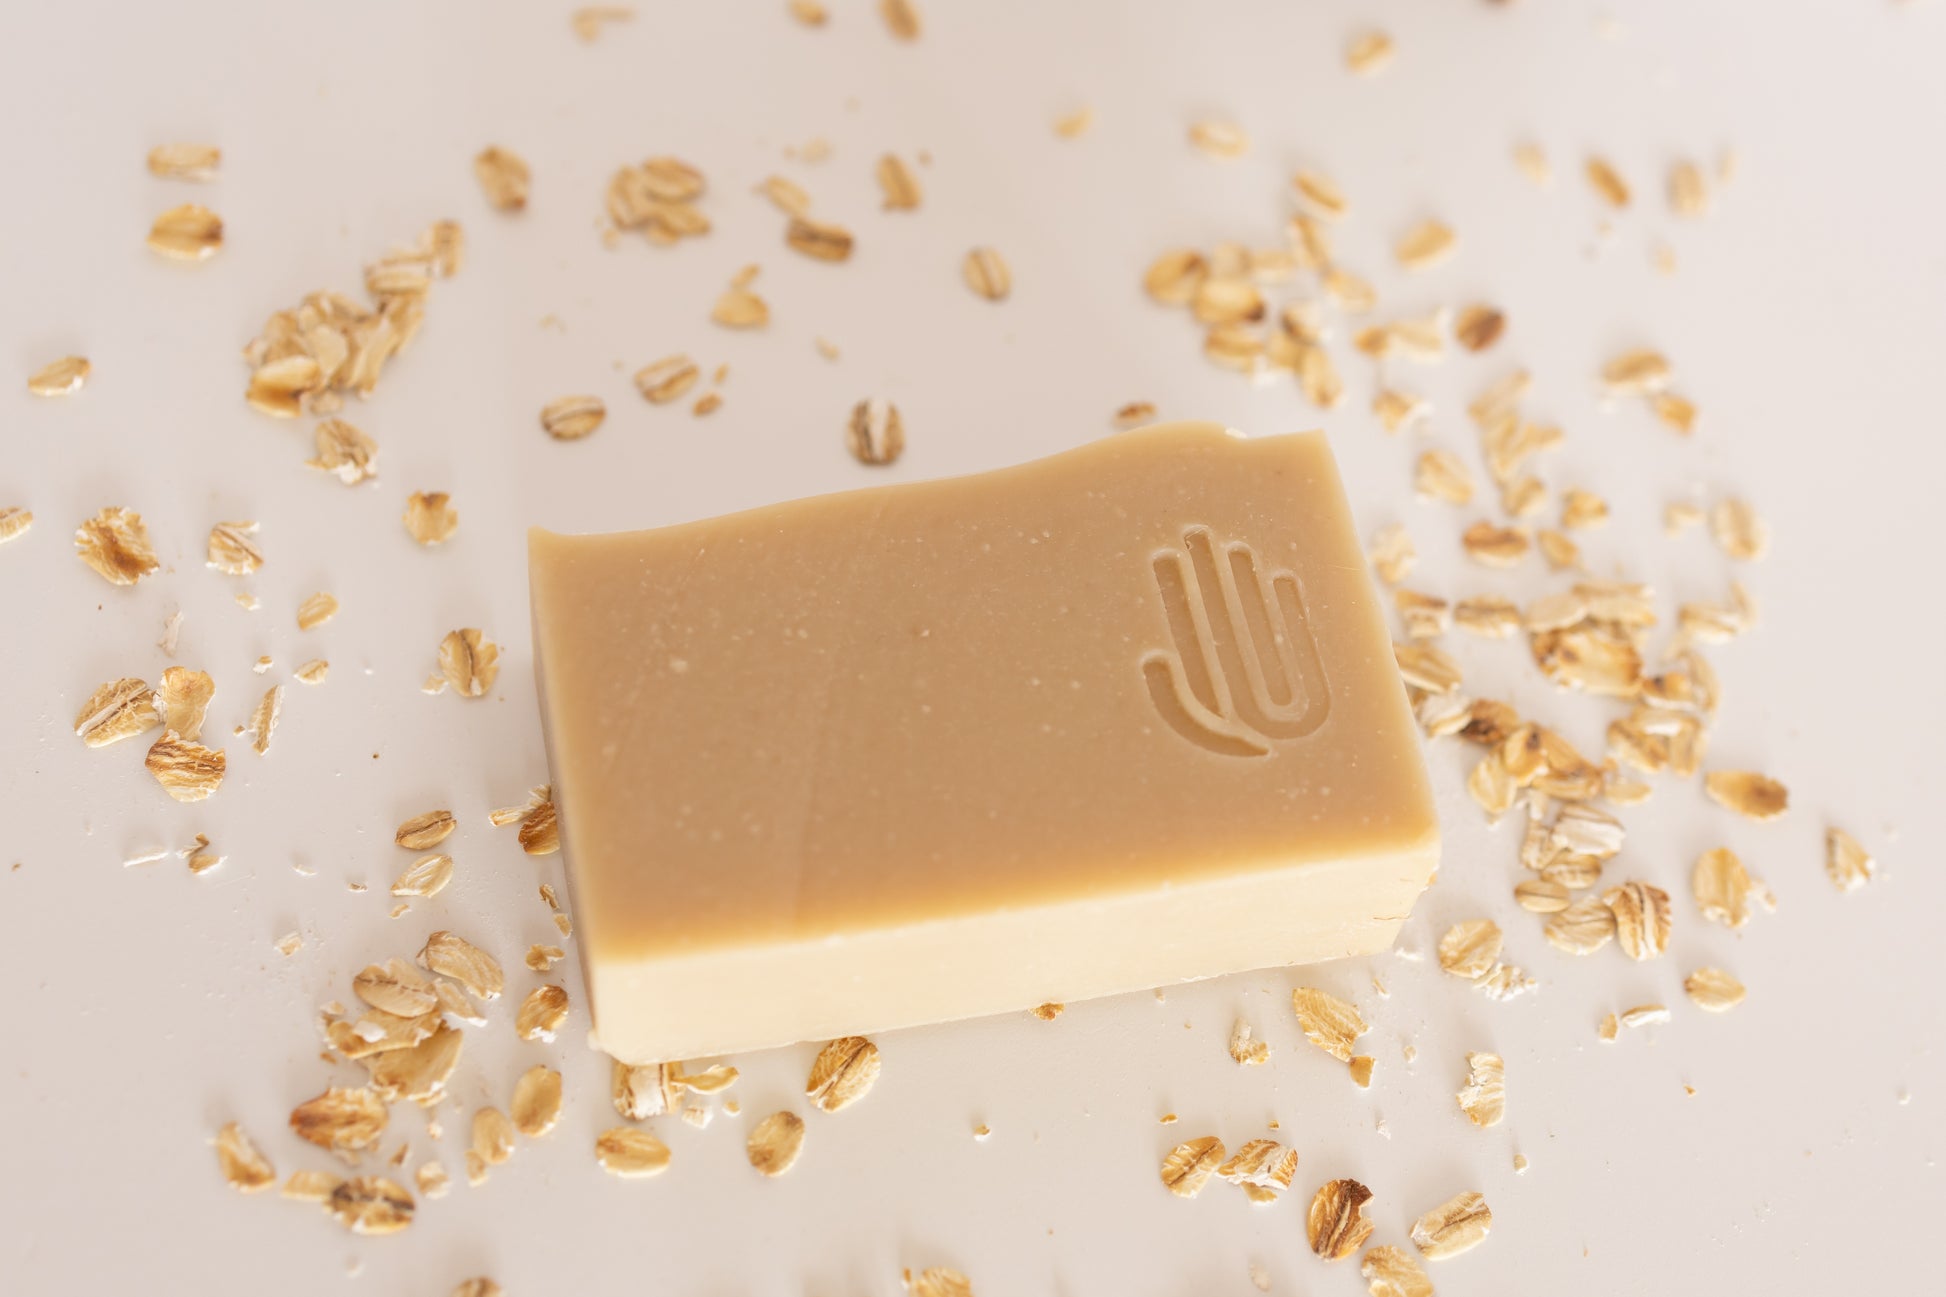 square tan colored soap with rolled oats scattered around